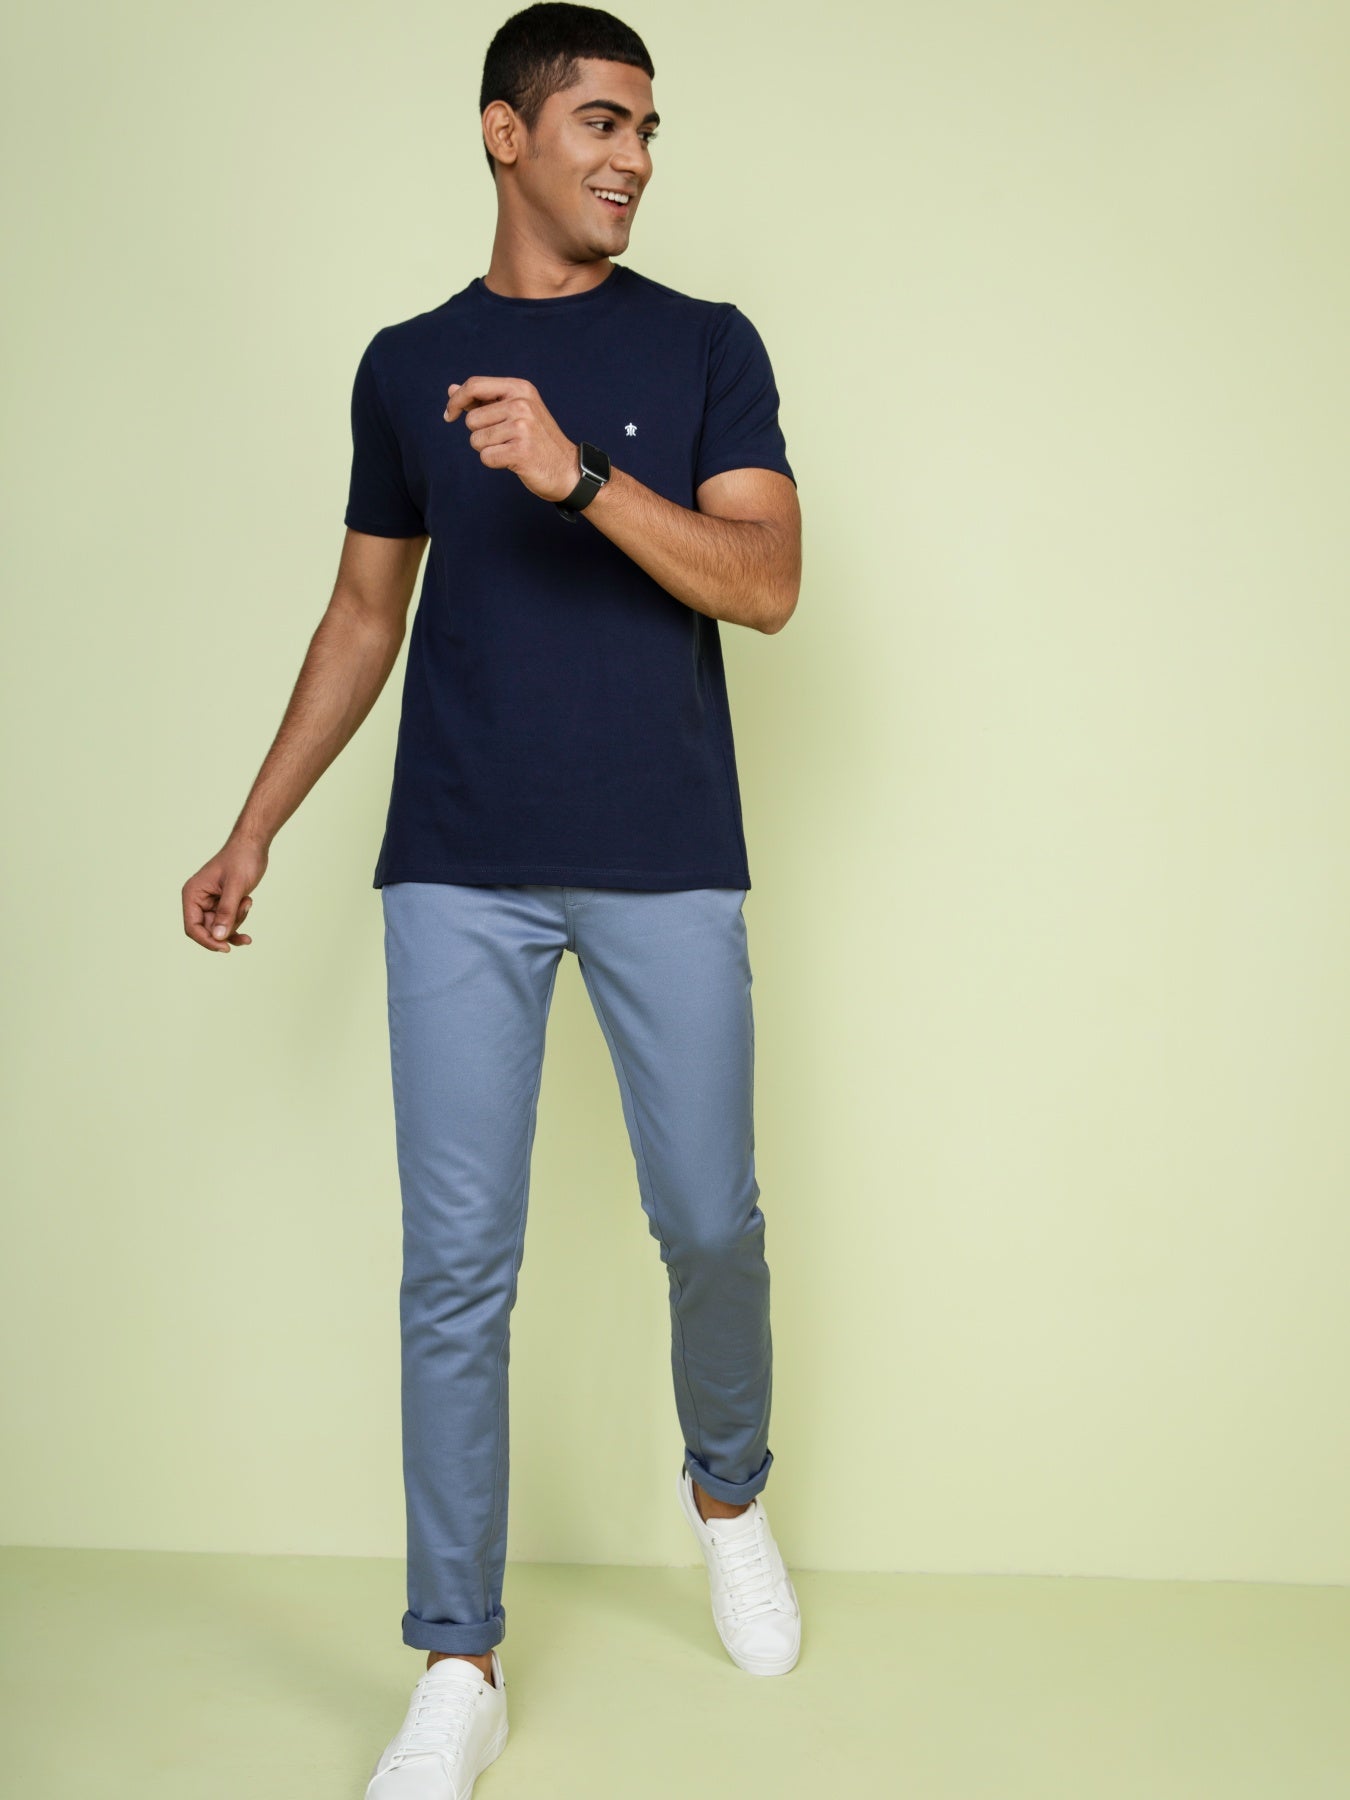 Navy All Weather Crew Neck T-Shirt For Men